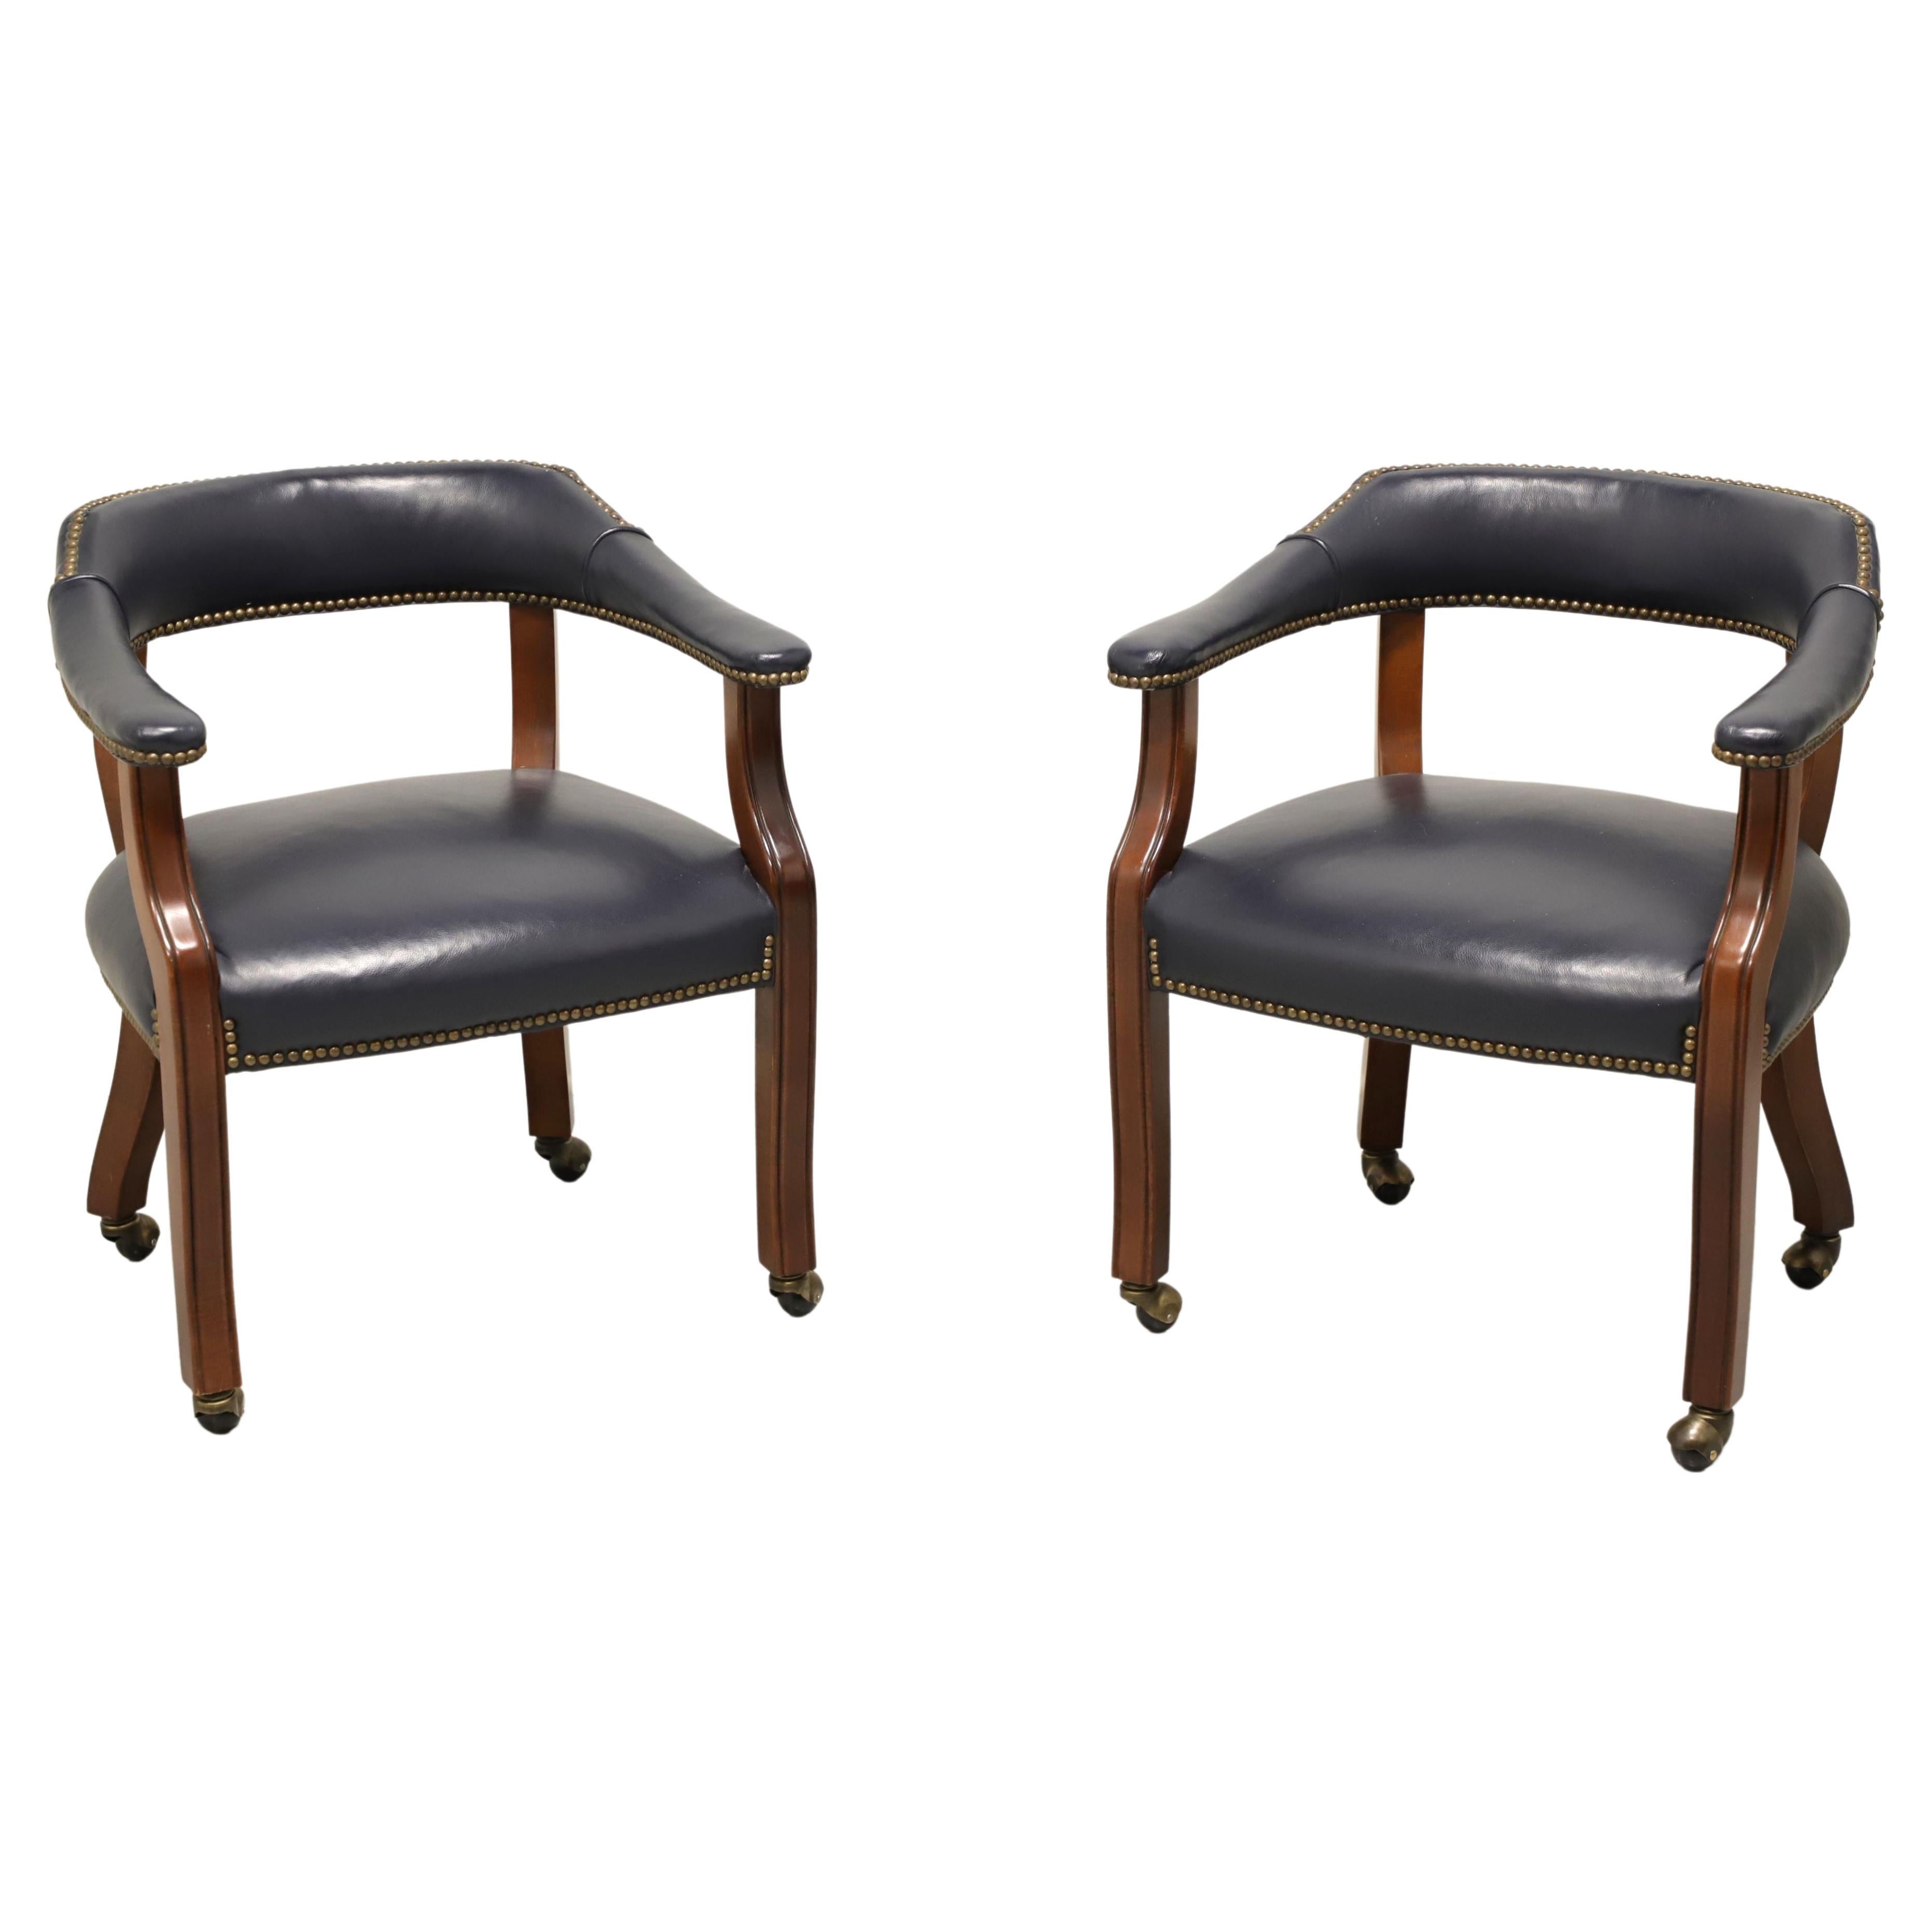 GORDON’S Late 20th Century Leather Club Chairs on Casters - Pair A